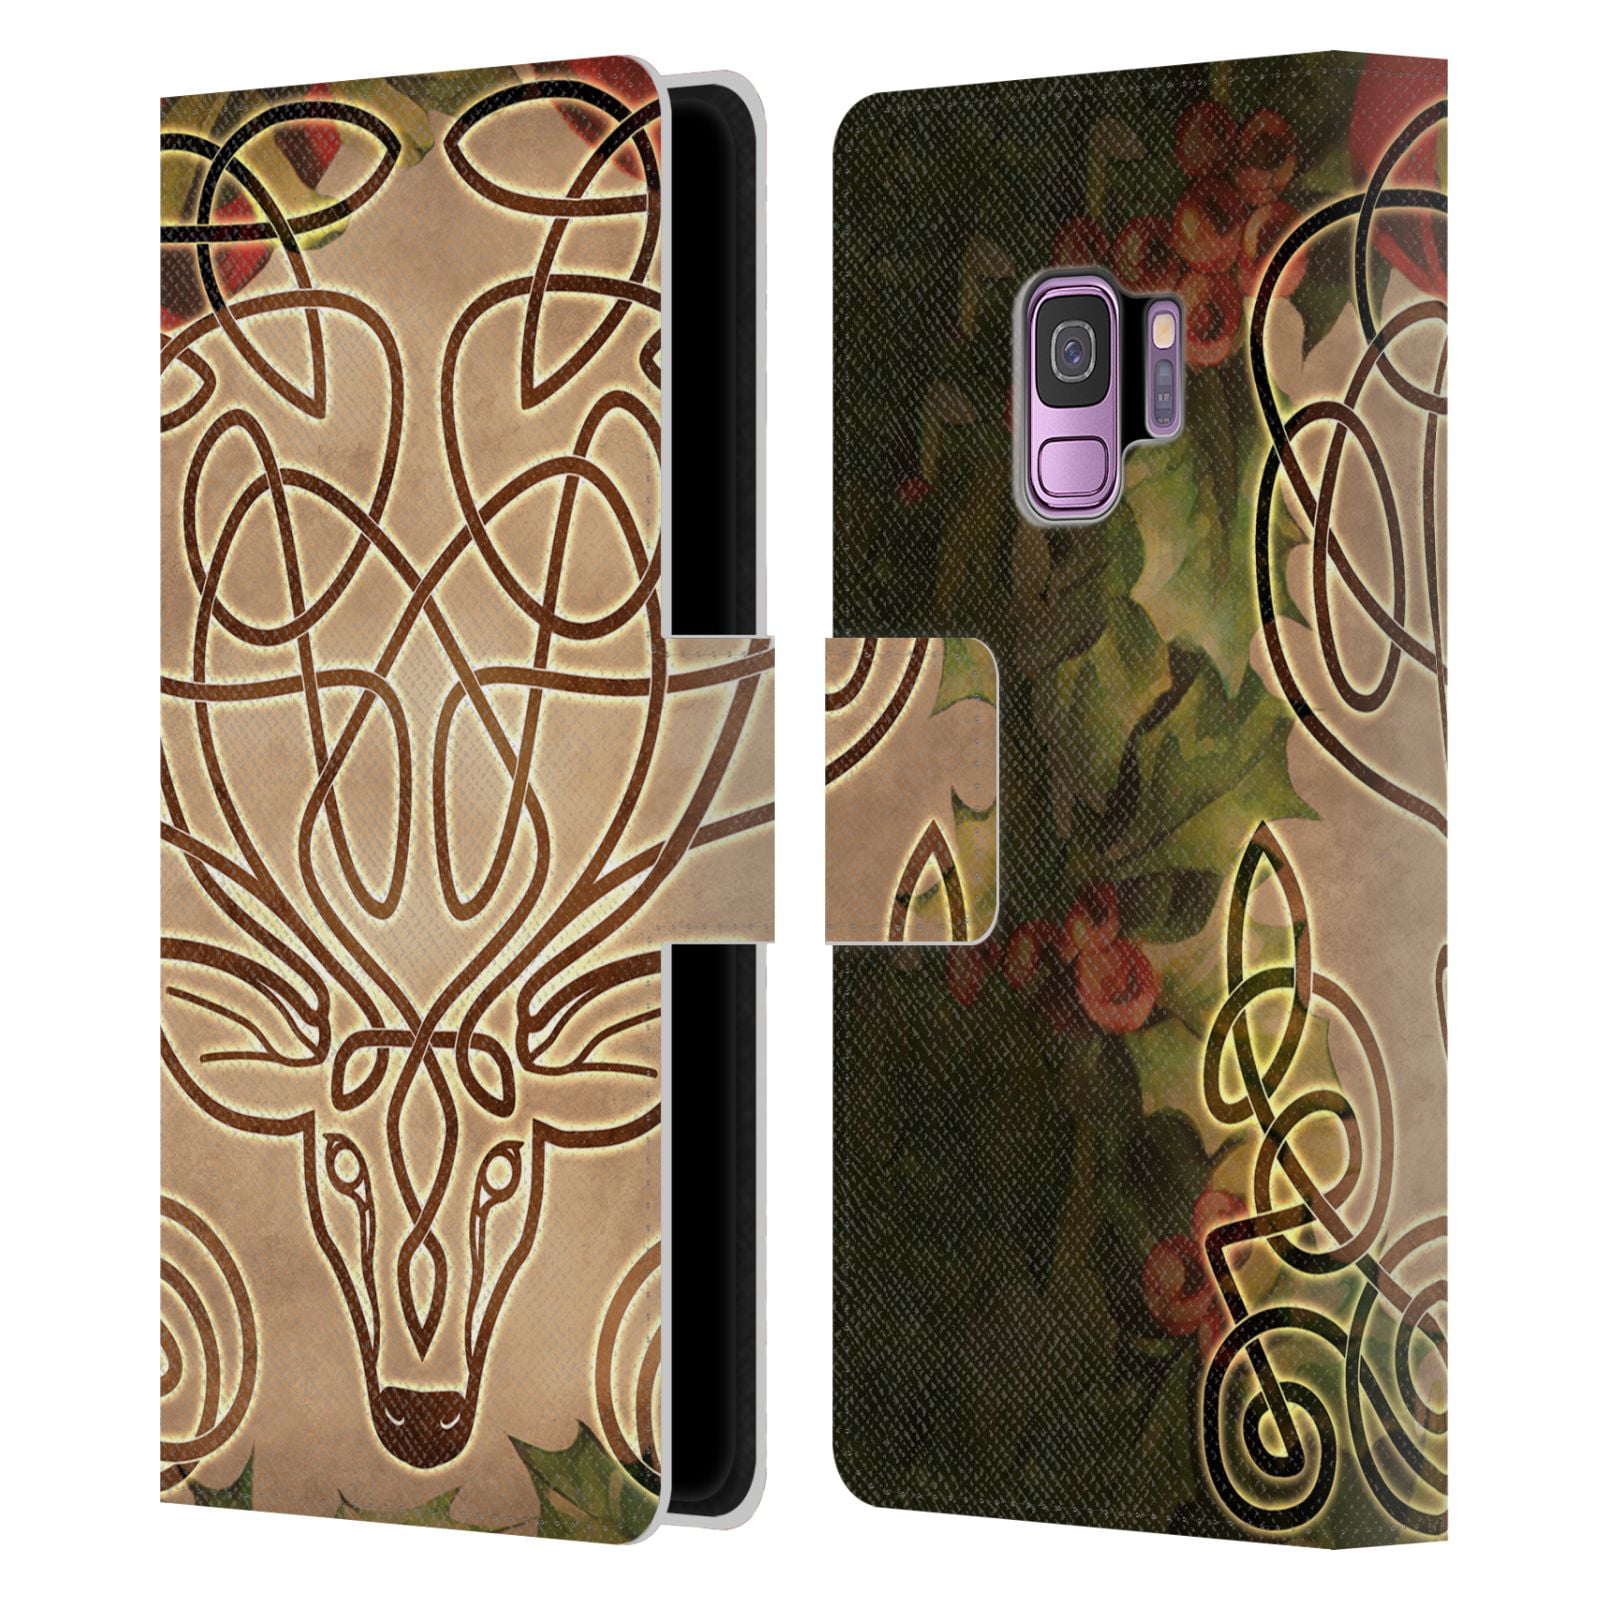 Head Case Designs Officially Licensed By Brigid Ashwood Daffodil Celtic Wisdom 3 Leather Passport Holder Wallet Cover Case 